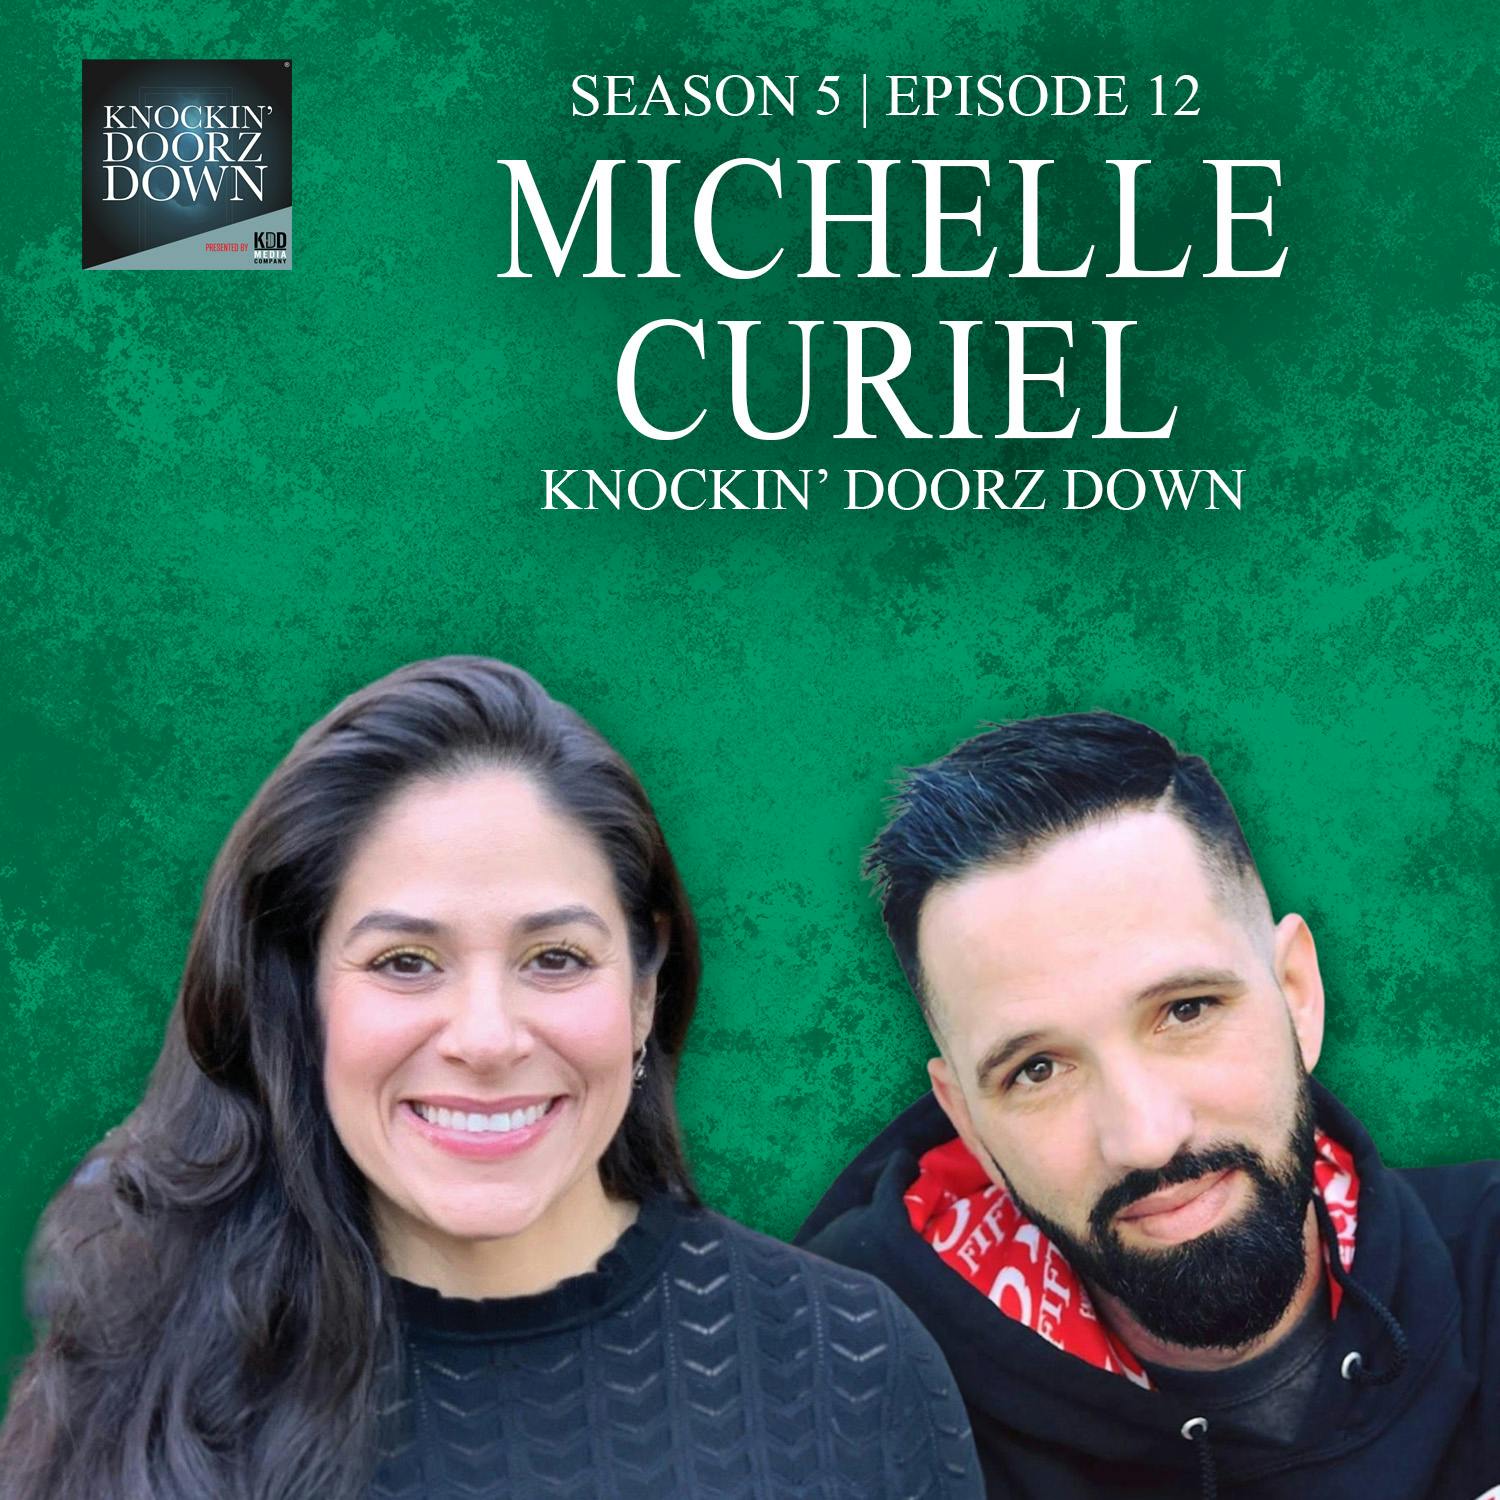 Michelle Curiel | Discernment In Recovery, Boundaries Vs Accessibility & Self-Reflection